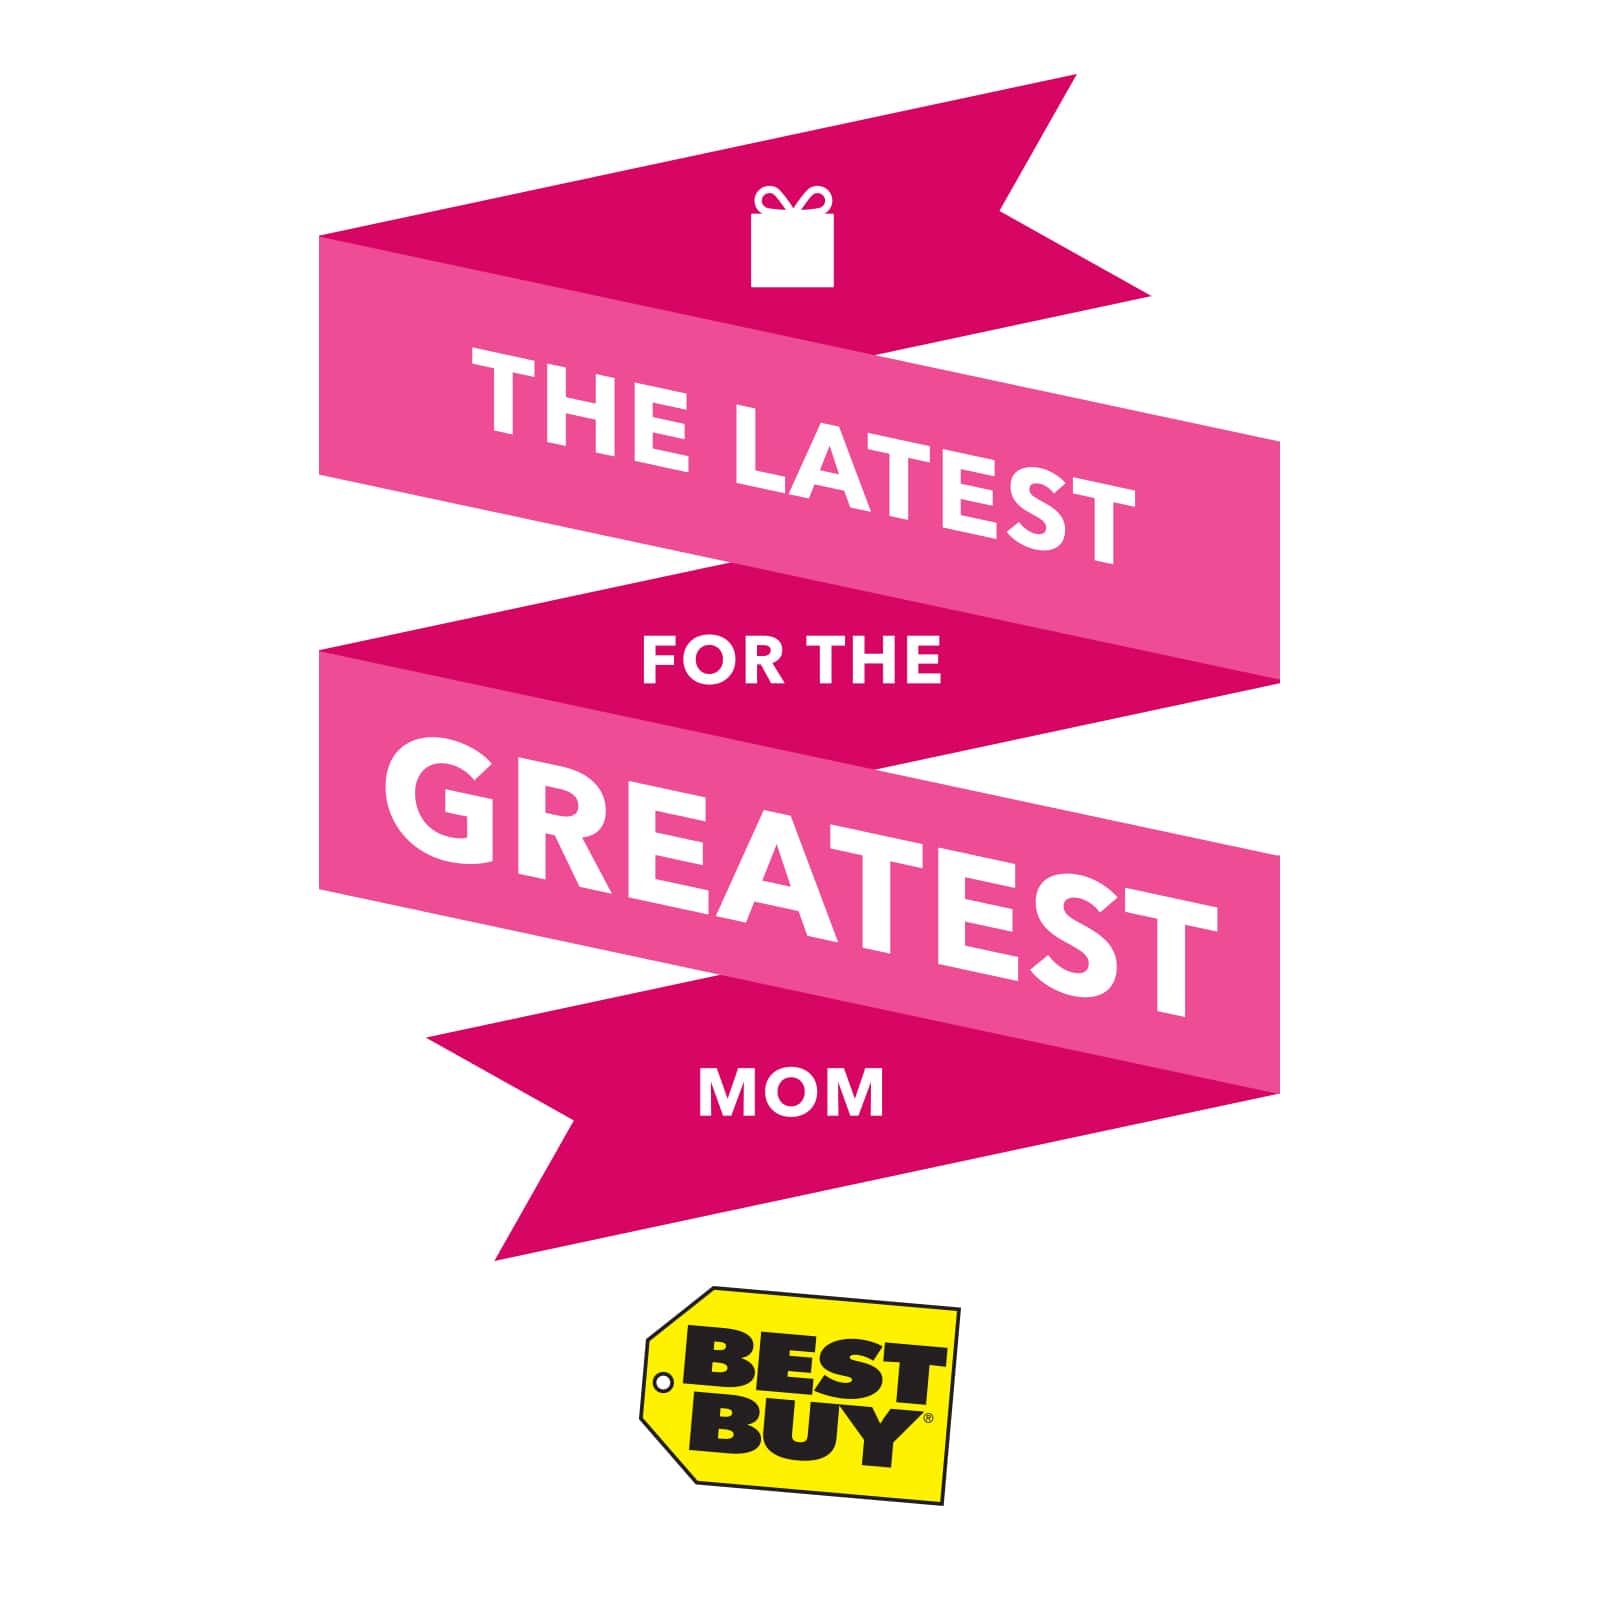 Best Buy Has The Latest For The Greatest Moms! | Optimistic Mommy